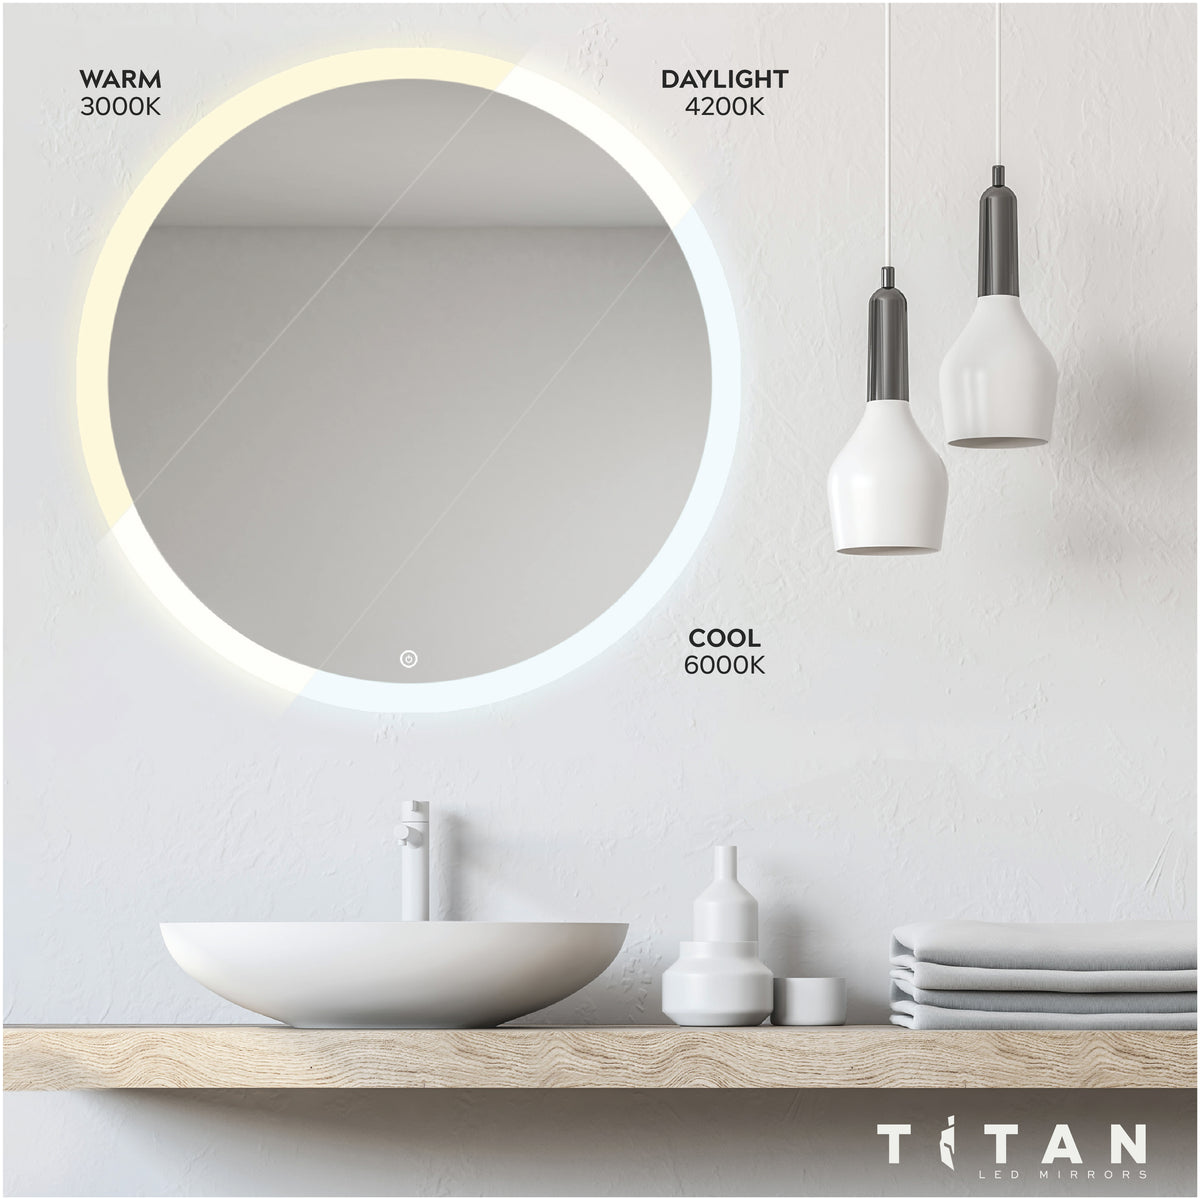 Elevate your bathroom ambiance with the Titan LED Mirror, featuring three light temperature settings for a customizable and atmospheric experience.